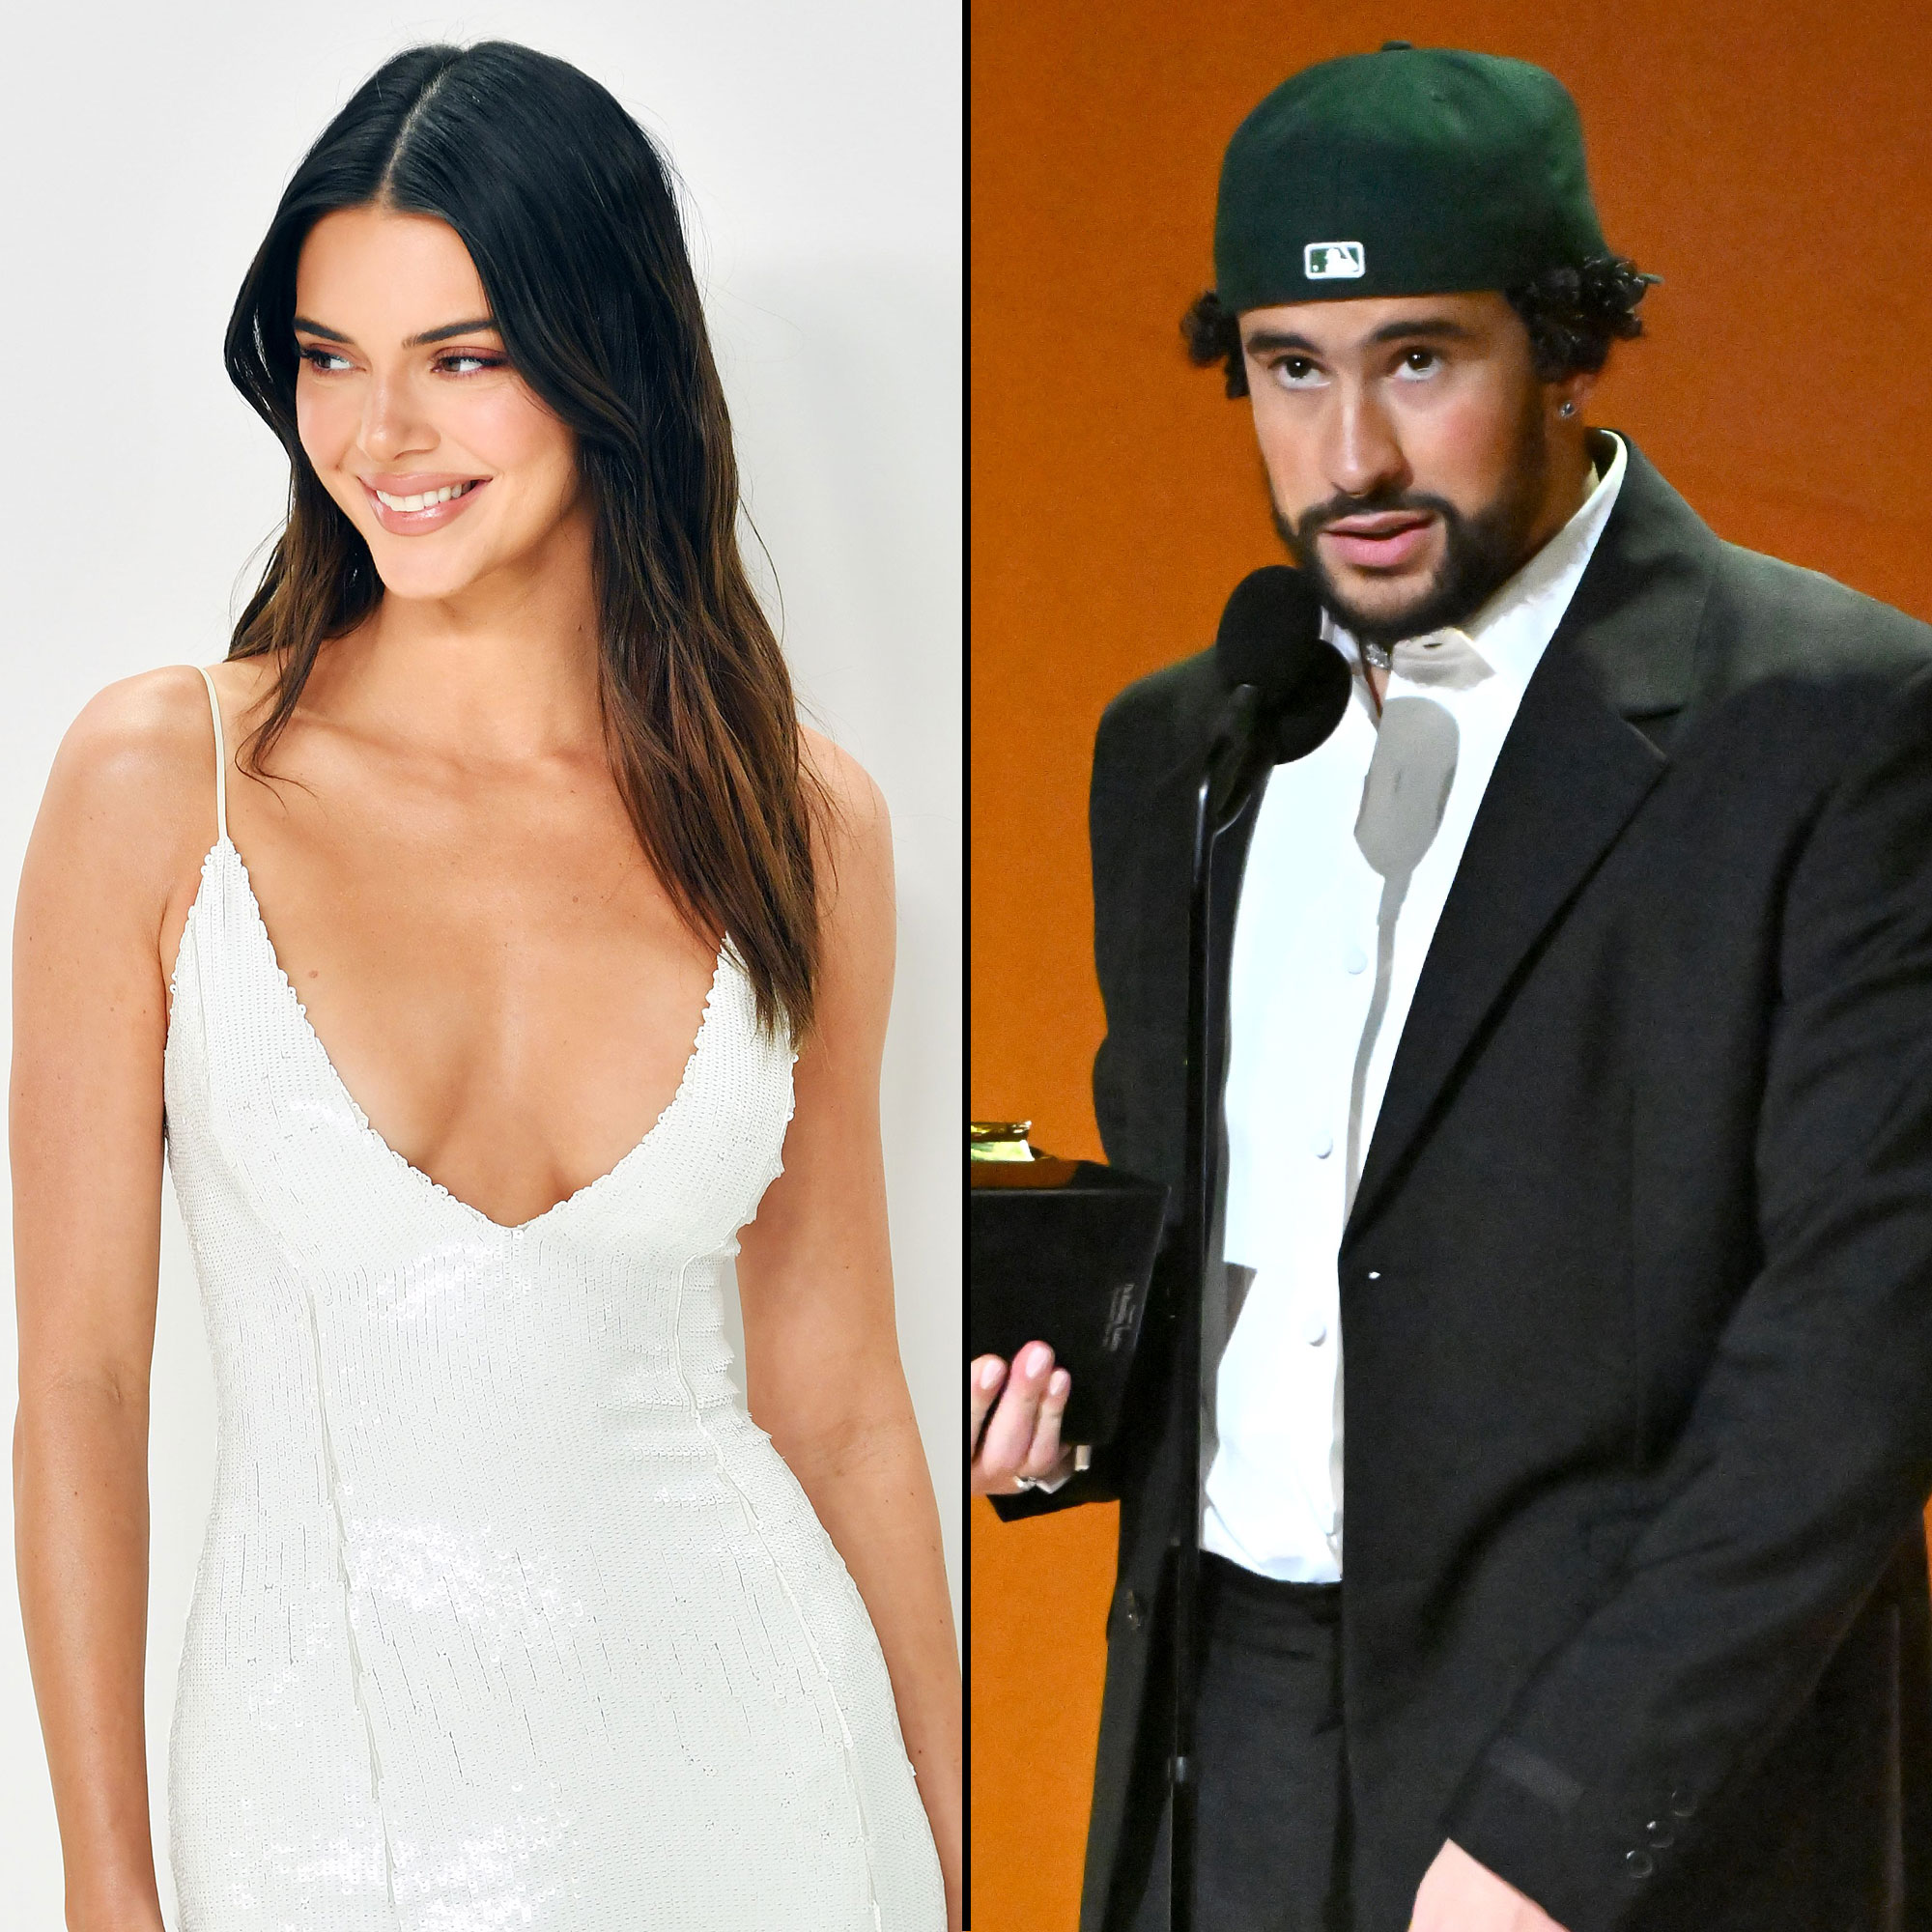 Bad Bunny and Kendall Jenner make their romance Gucci official